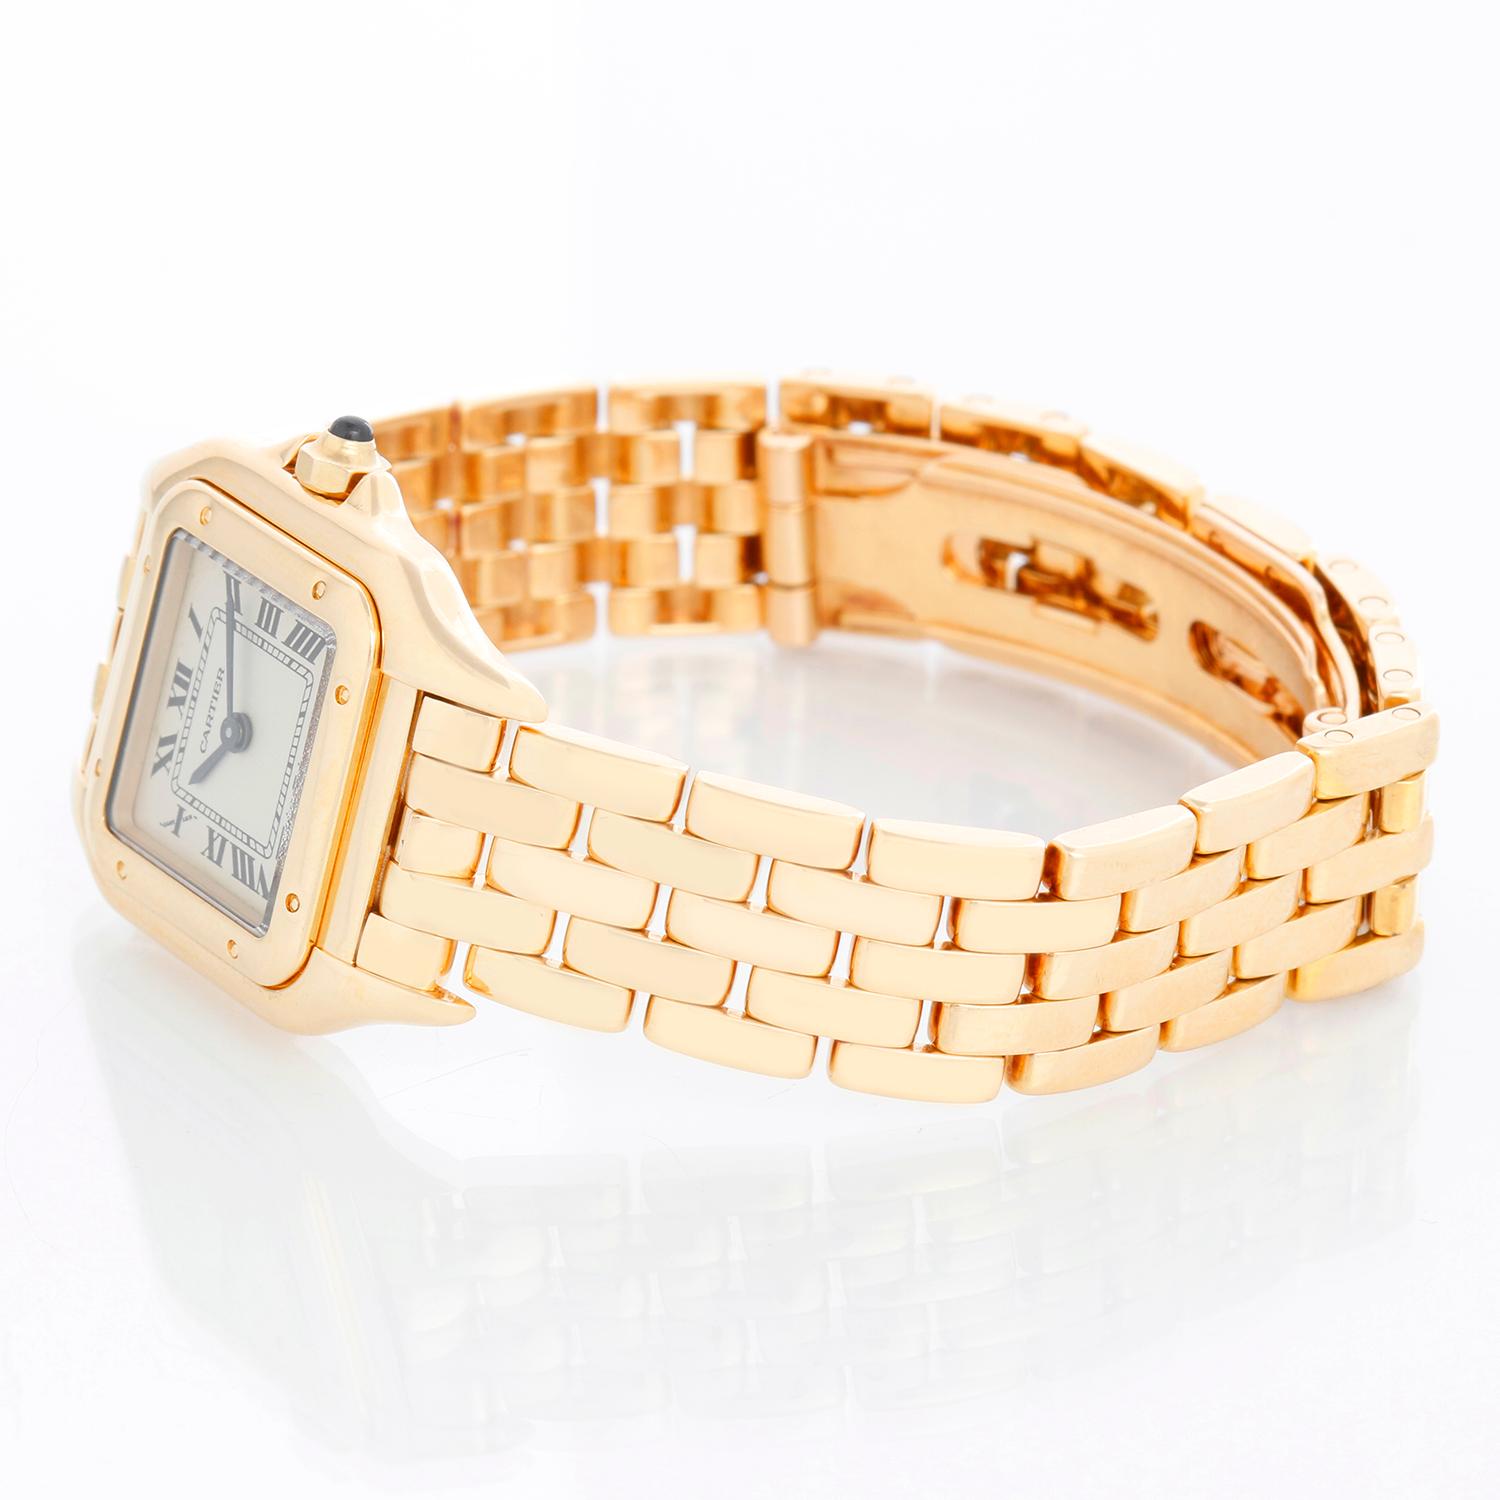 Cartier Panther Ladies 18k Yellow Gold Watch W25022B9 1070 - Quartz. 18k yellow gold case (22mm x 30mm ). Ivory colored dial with black Roman numerals. 18k yellow gold Panther bracelet. Pre-owned with Cartier pouch .